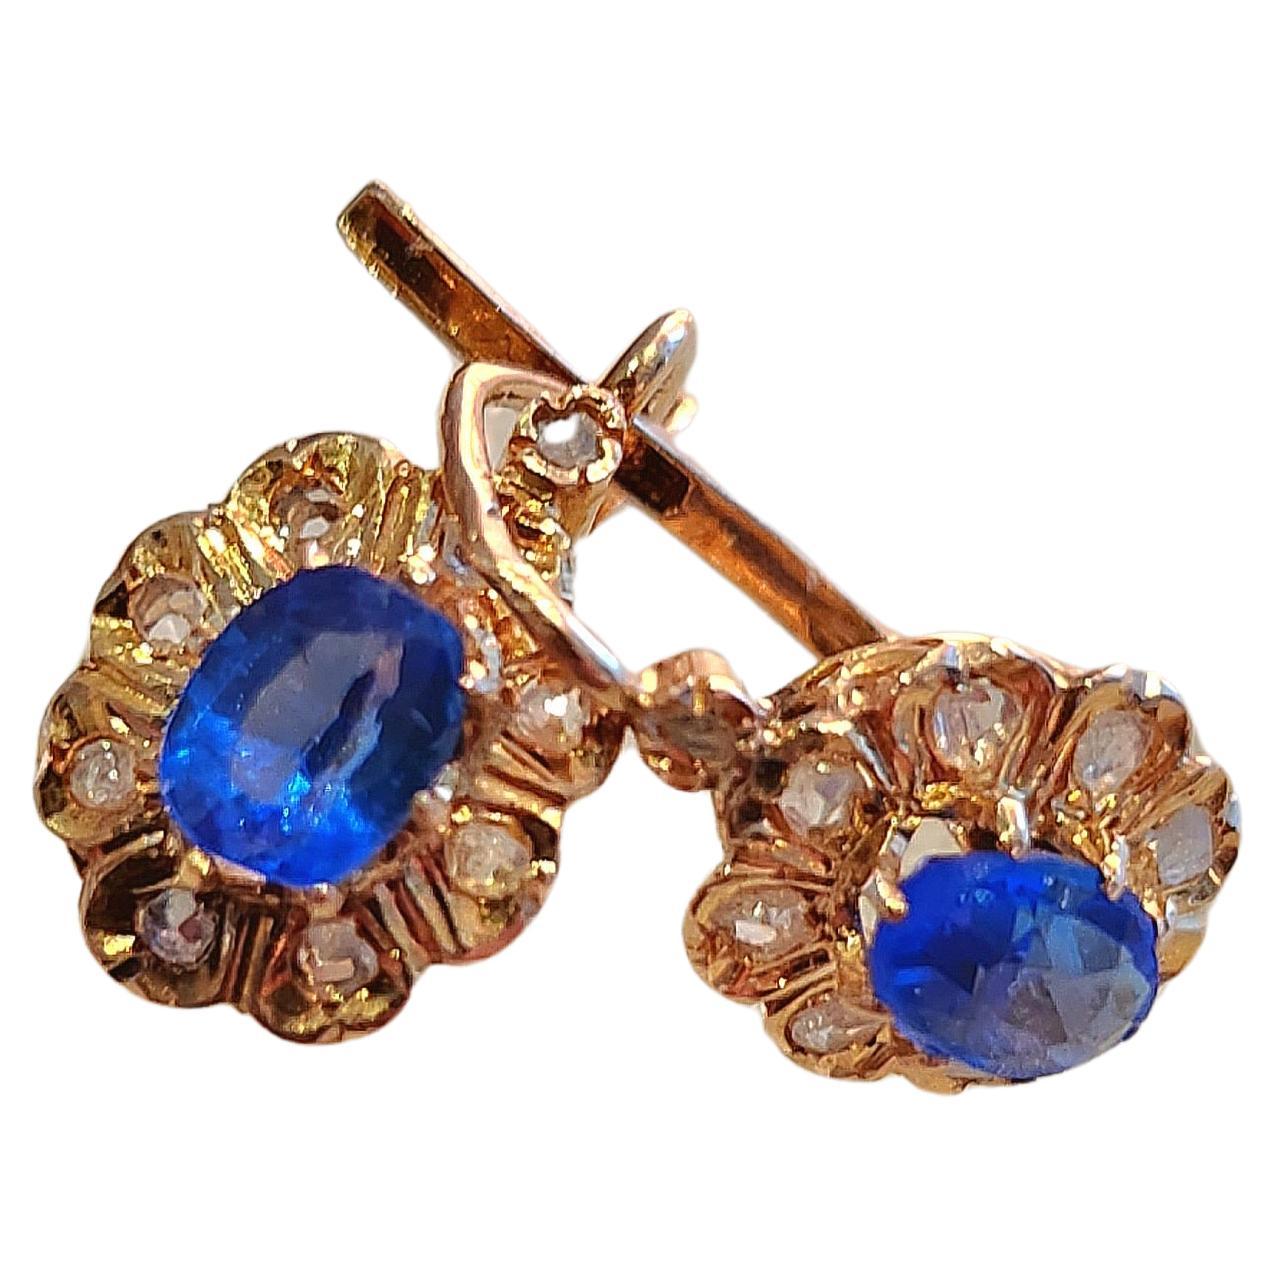 Antique french earrings with natural kashmire sapphire in velvety blue colour with an estimate total weight of 1.80 carats flanked with little rose cut diamonds in 18k gold finest hall marked with french eagle head gold standard for 18k dates back